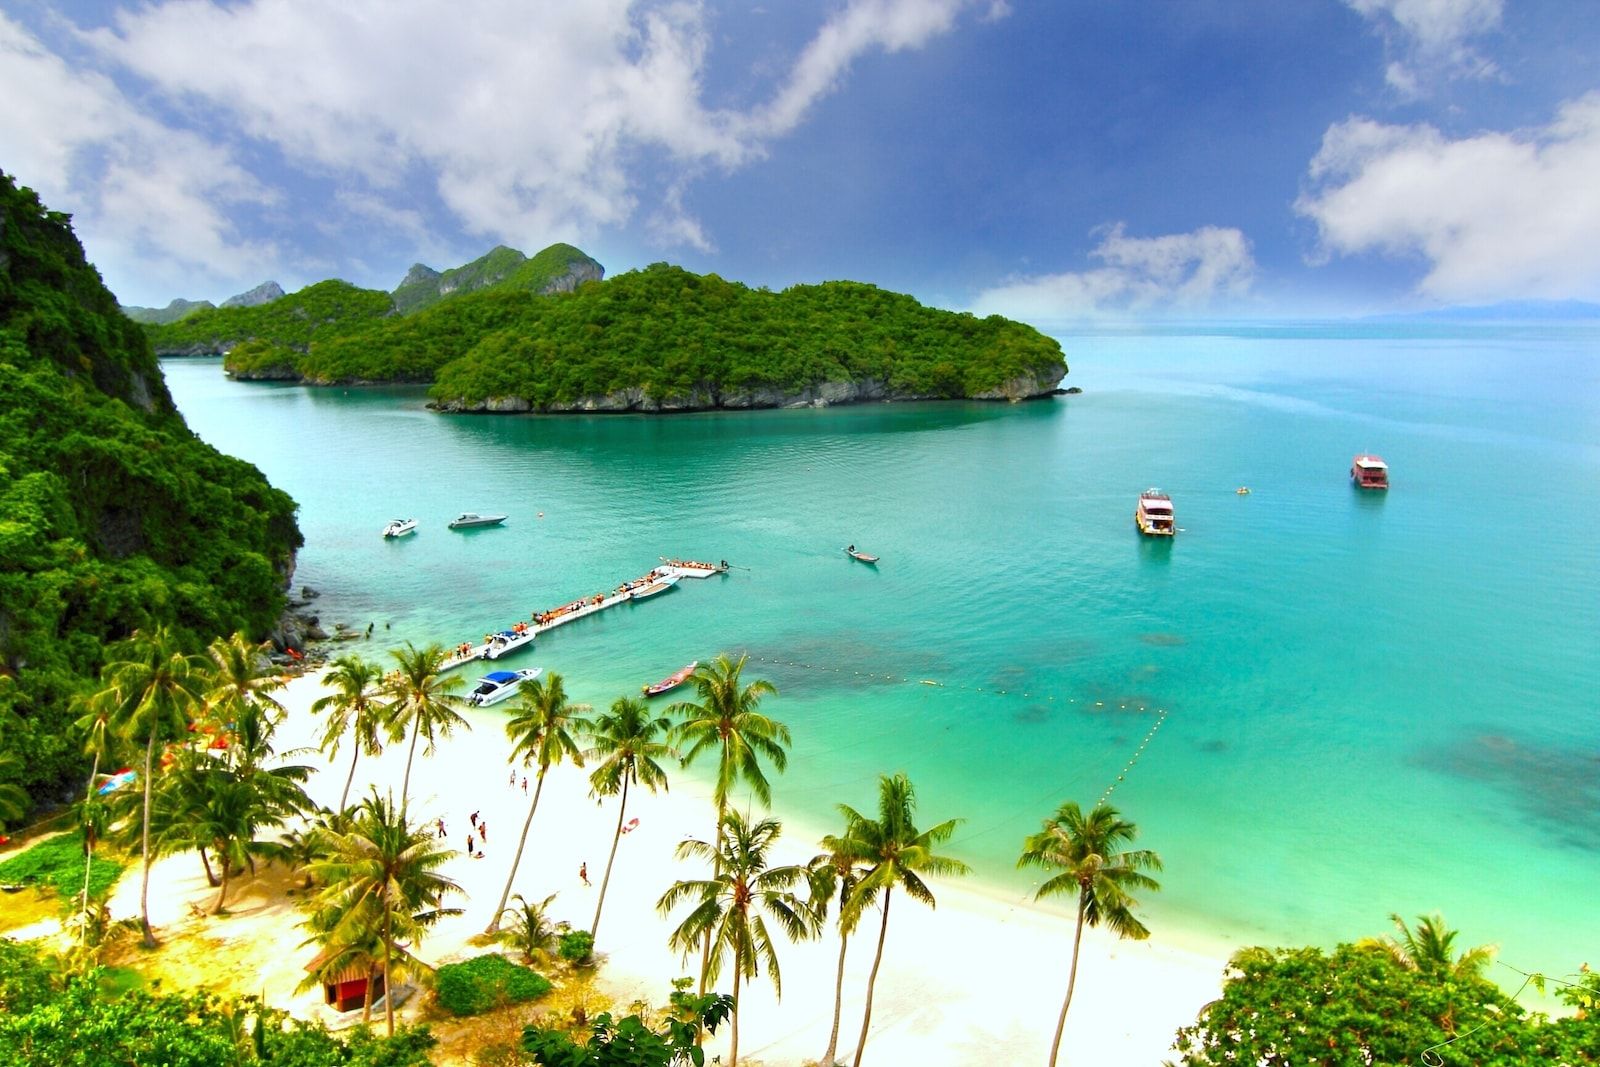 Discover South East Asia by yacht this winter - IYC